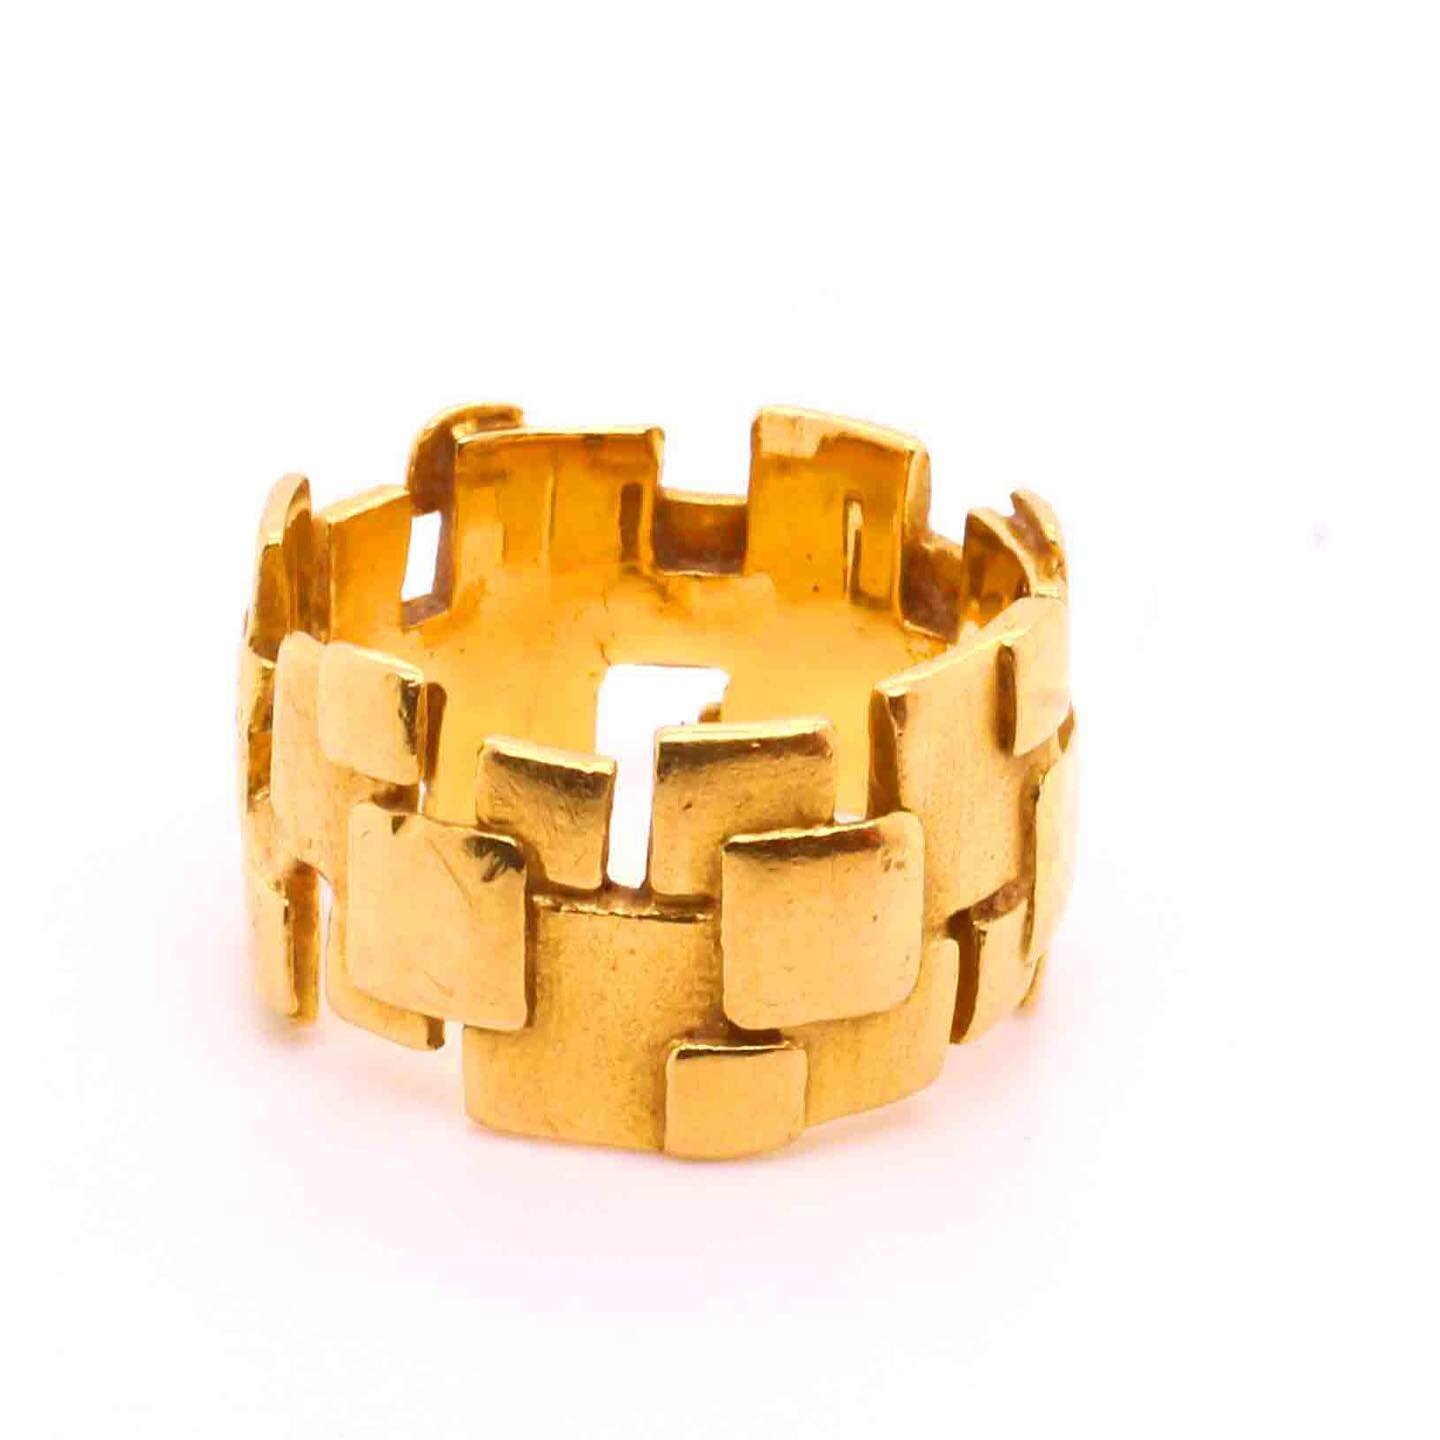 An awesome vintage abstract gold ring. European. Circa 1970 #flaxmanjewels #goldring #vintagegold #vintagegoldring #abstractjewelry #abstract #5goldrings #christmasgifts #windsor